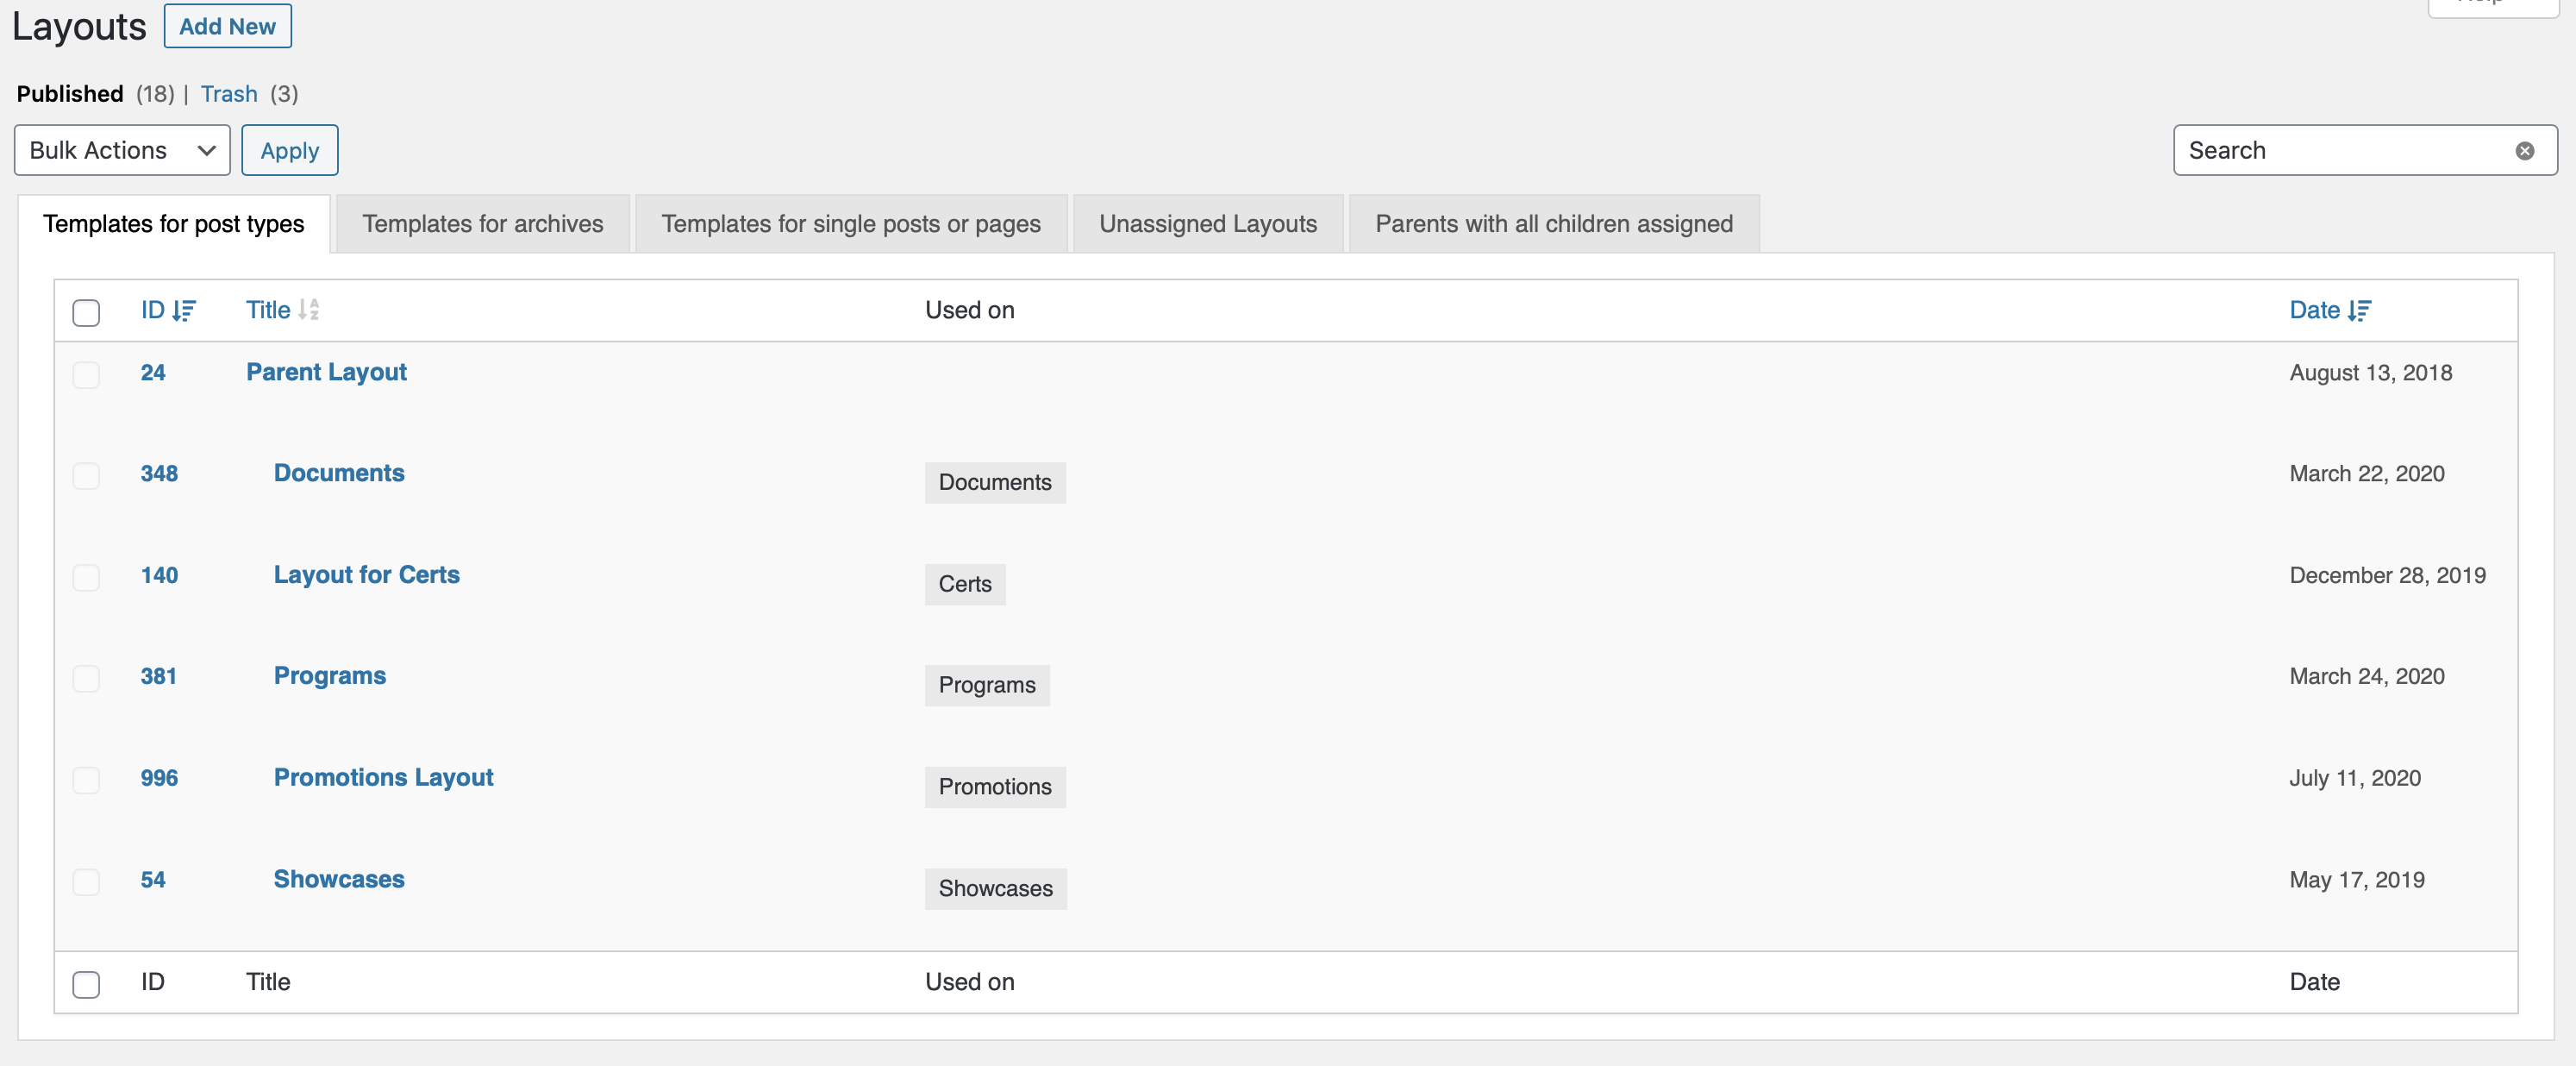 Control and Manage your Templates in a central place